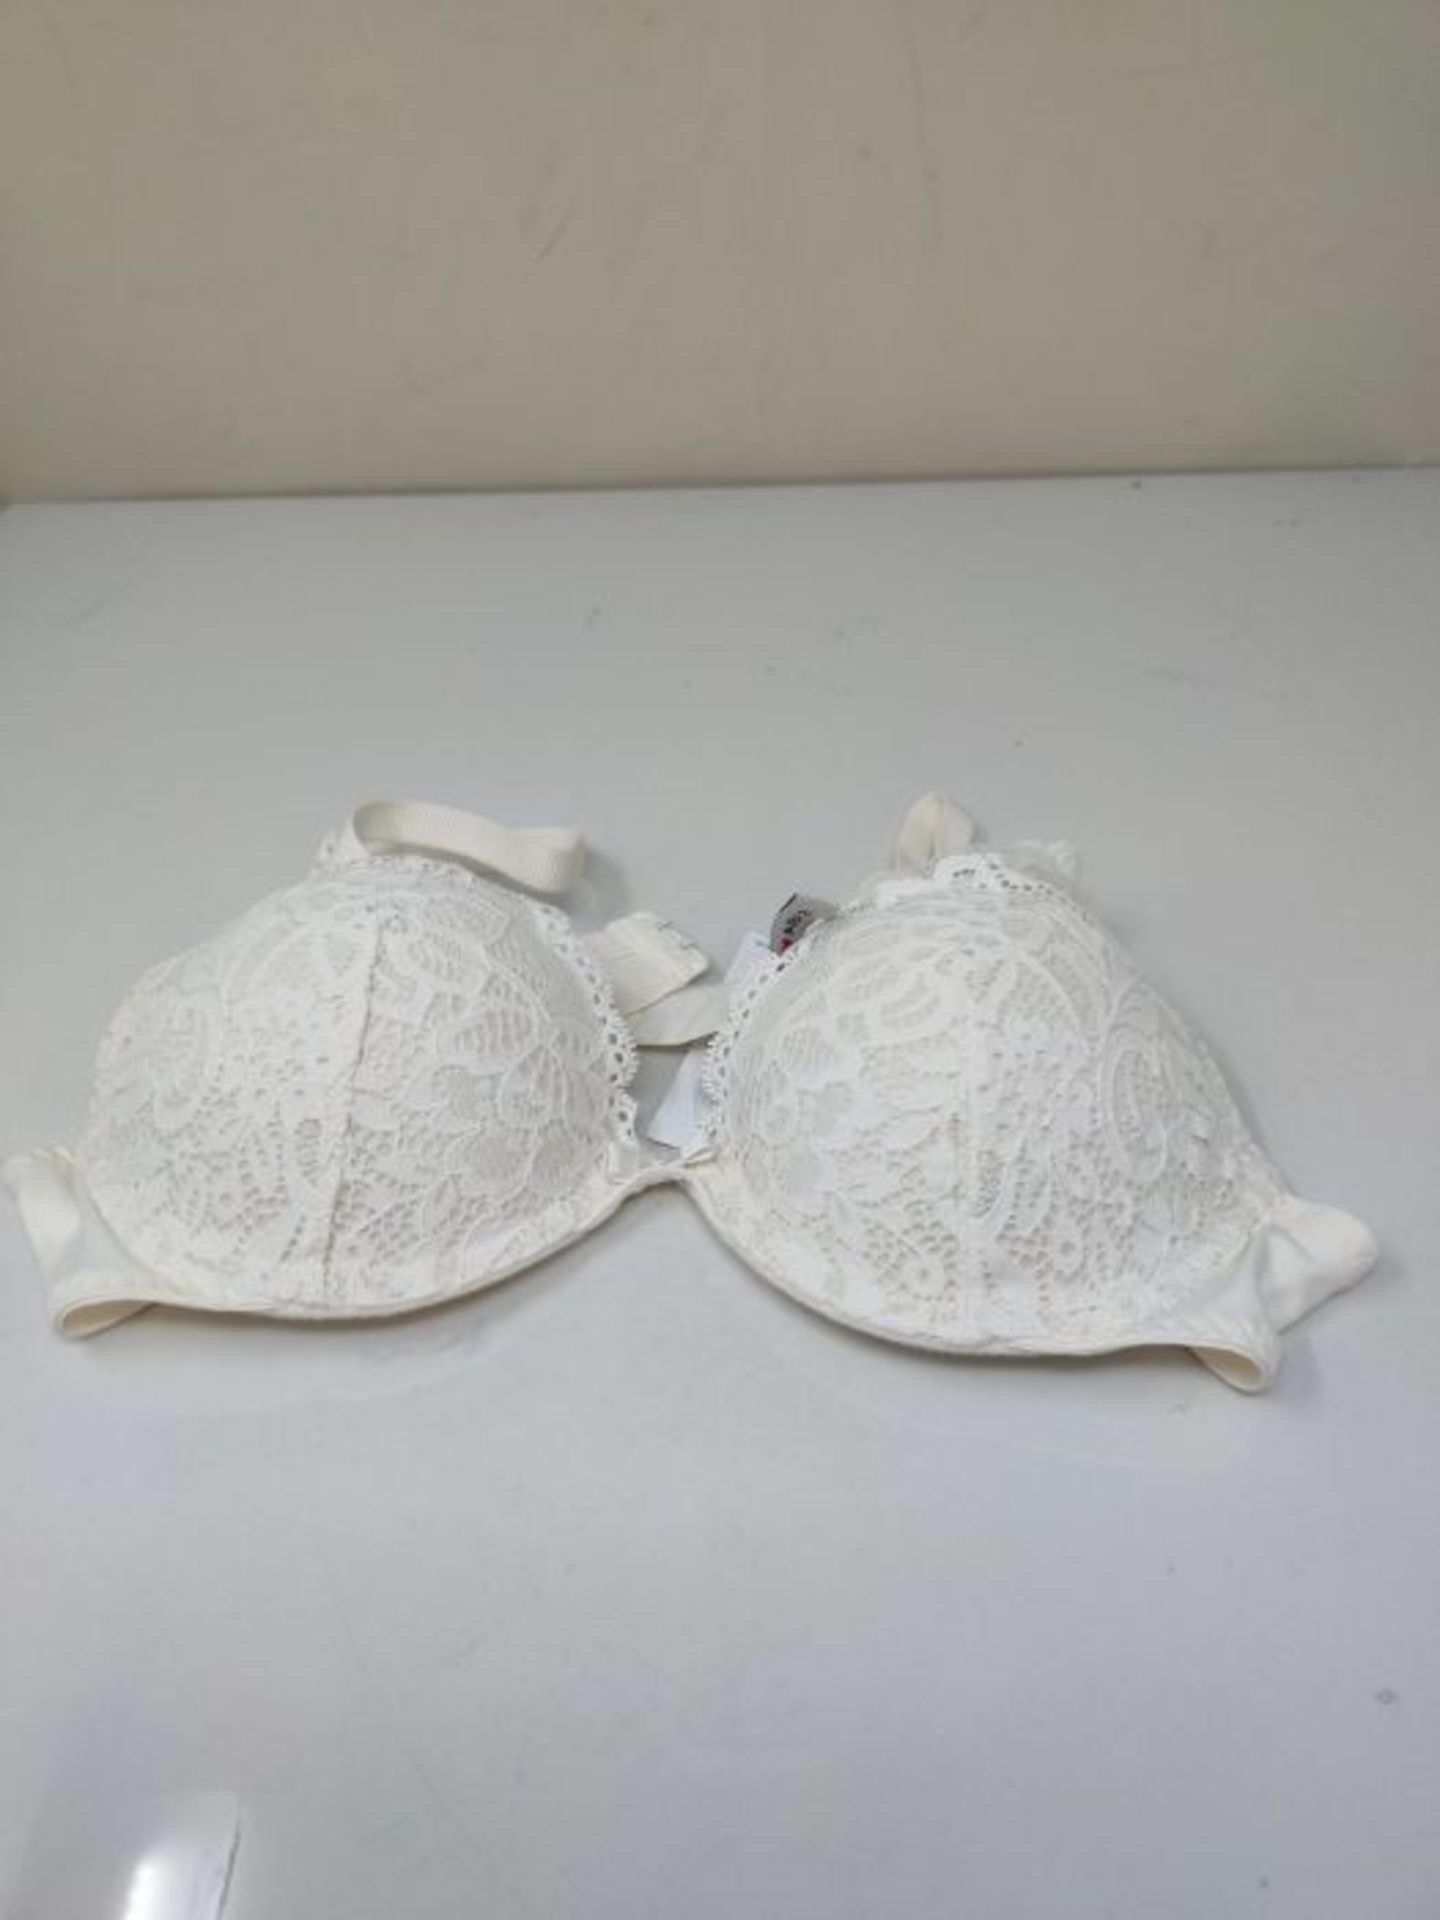 Lovable Women's Sublim Bra with Underwire - Image 3 of 3